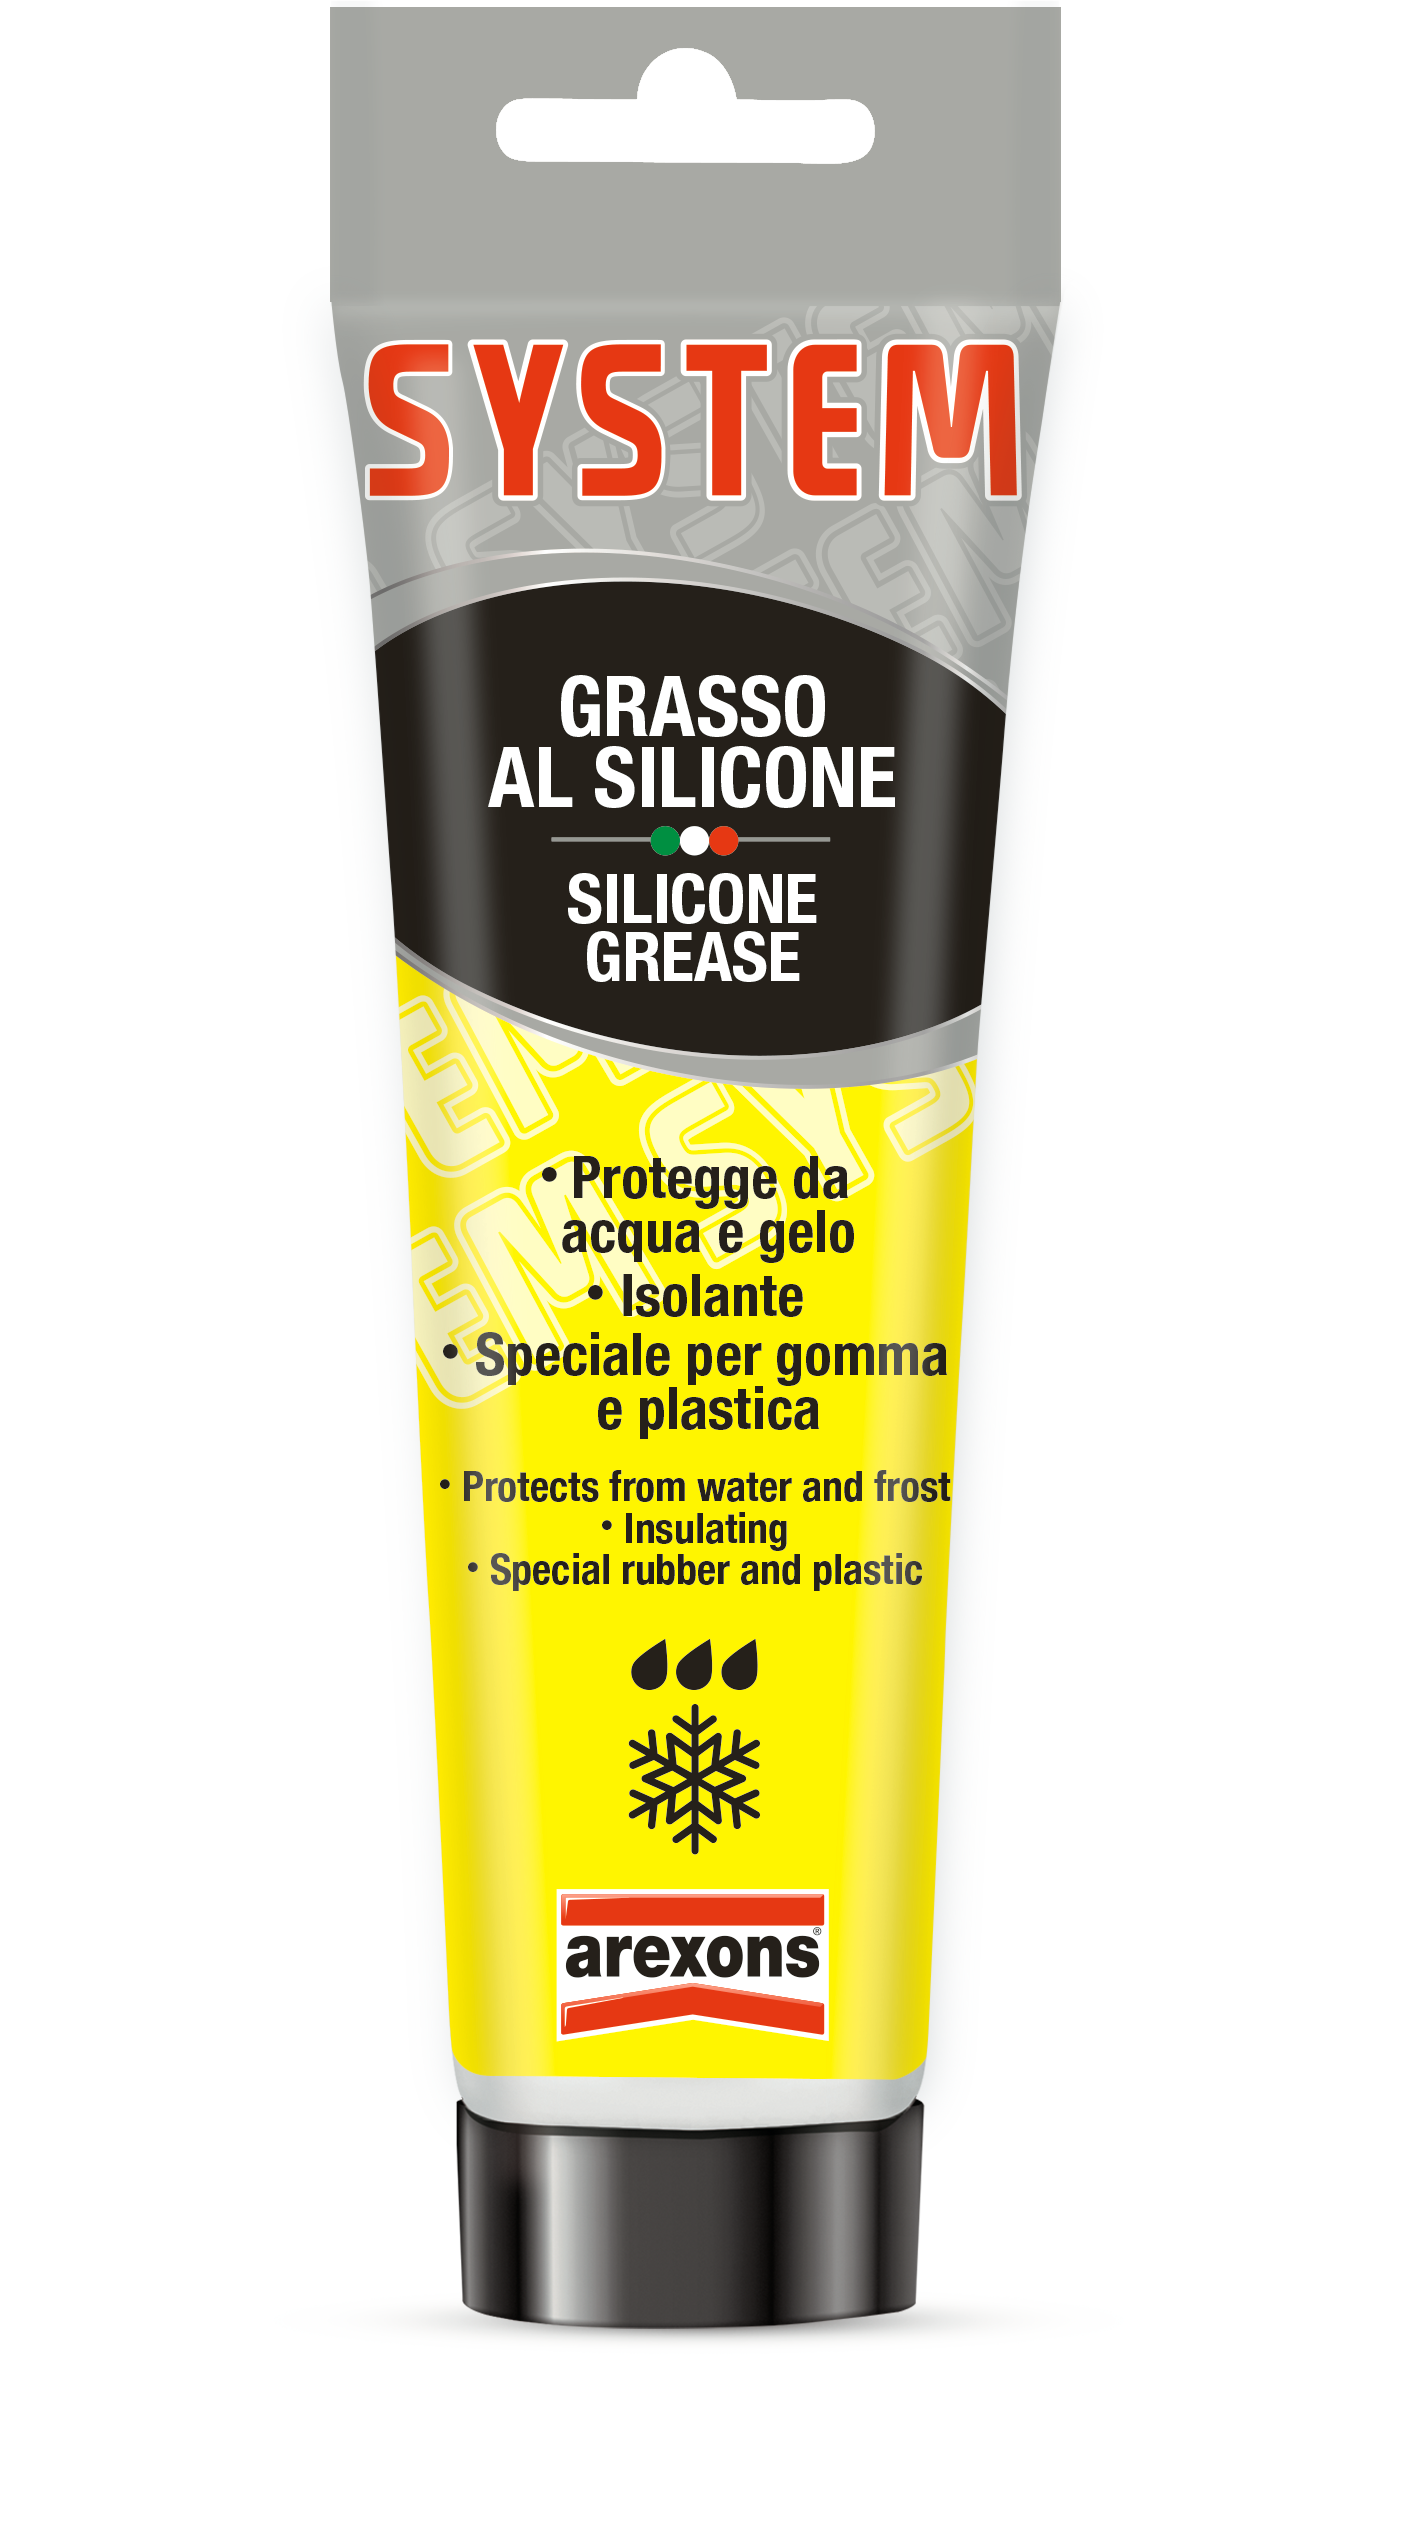 System grasso al silicone ml 100 - Arexons